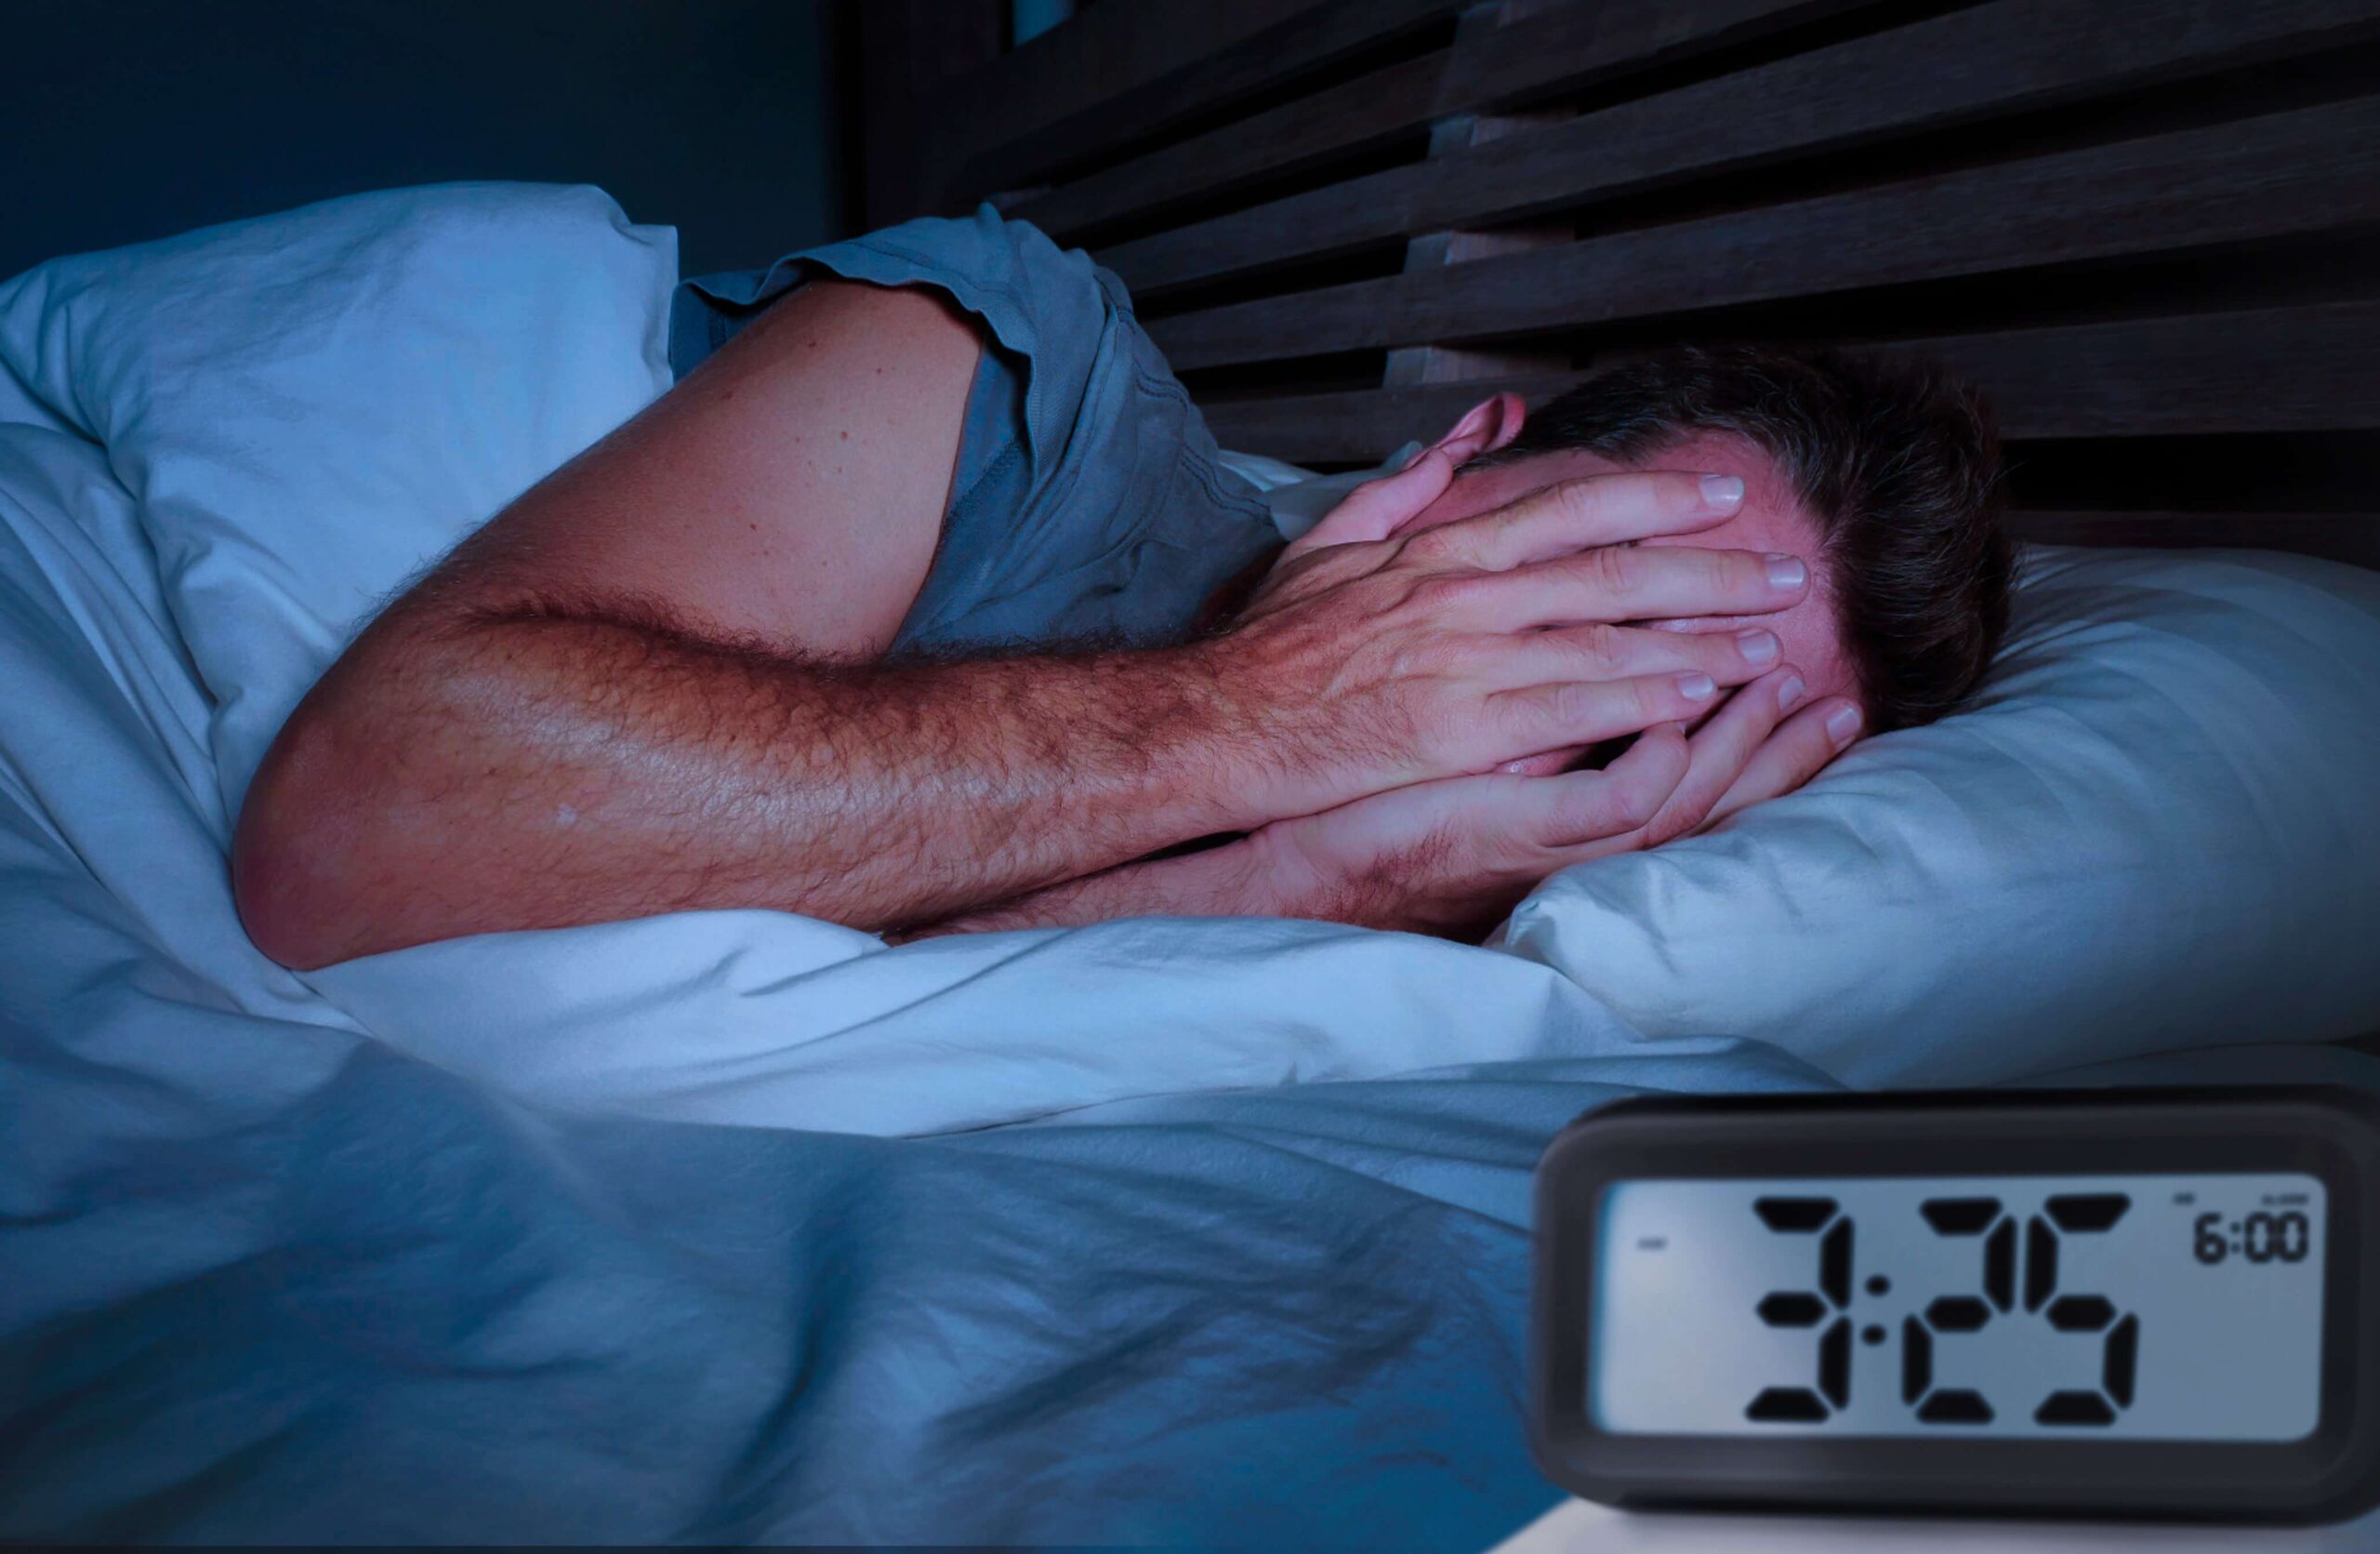 man in bed suffering from the sleep disorder insomnia